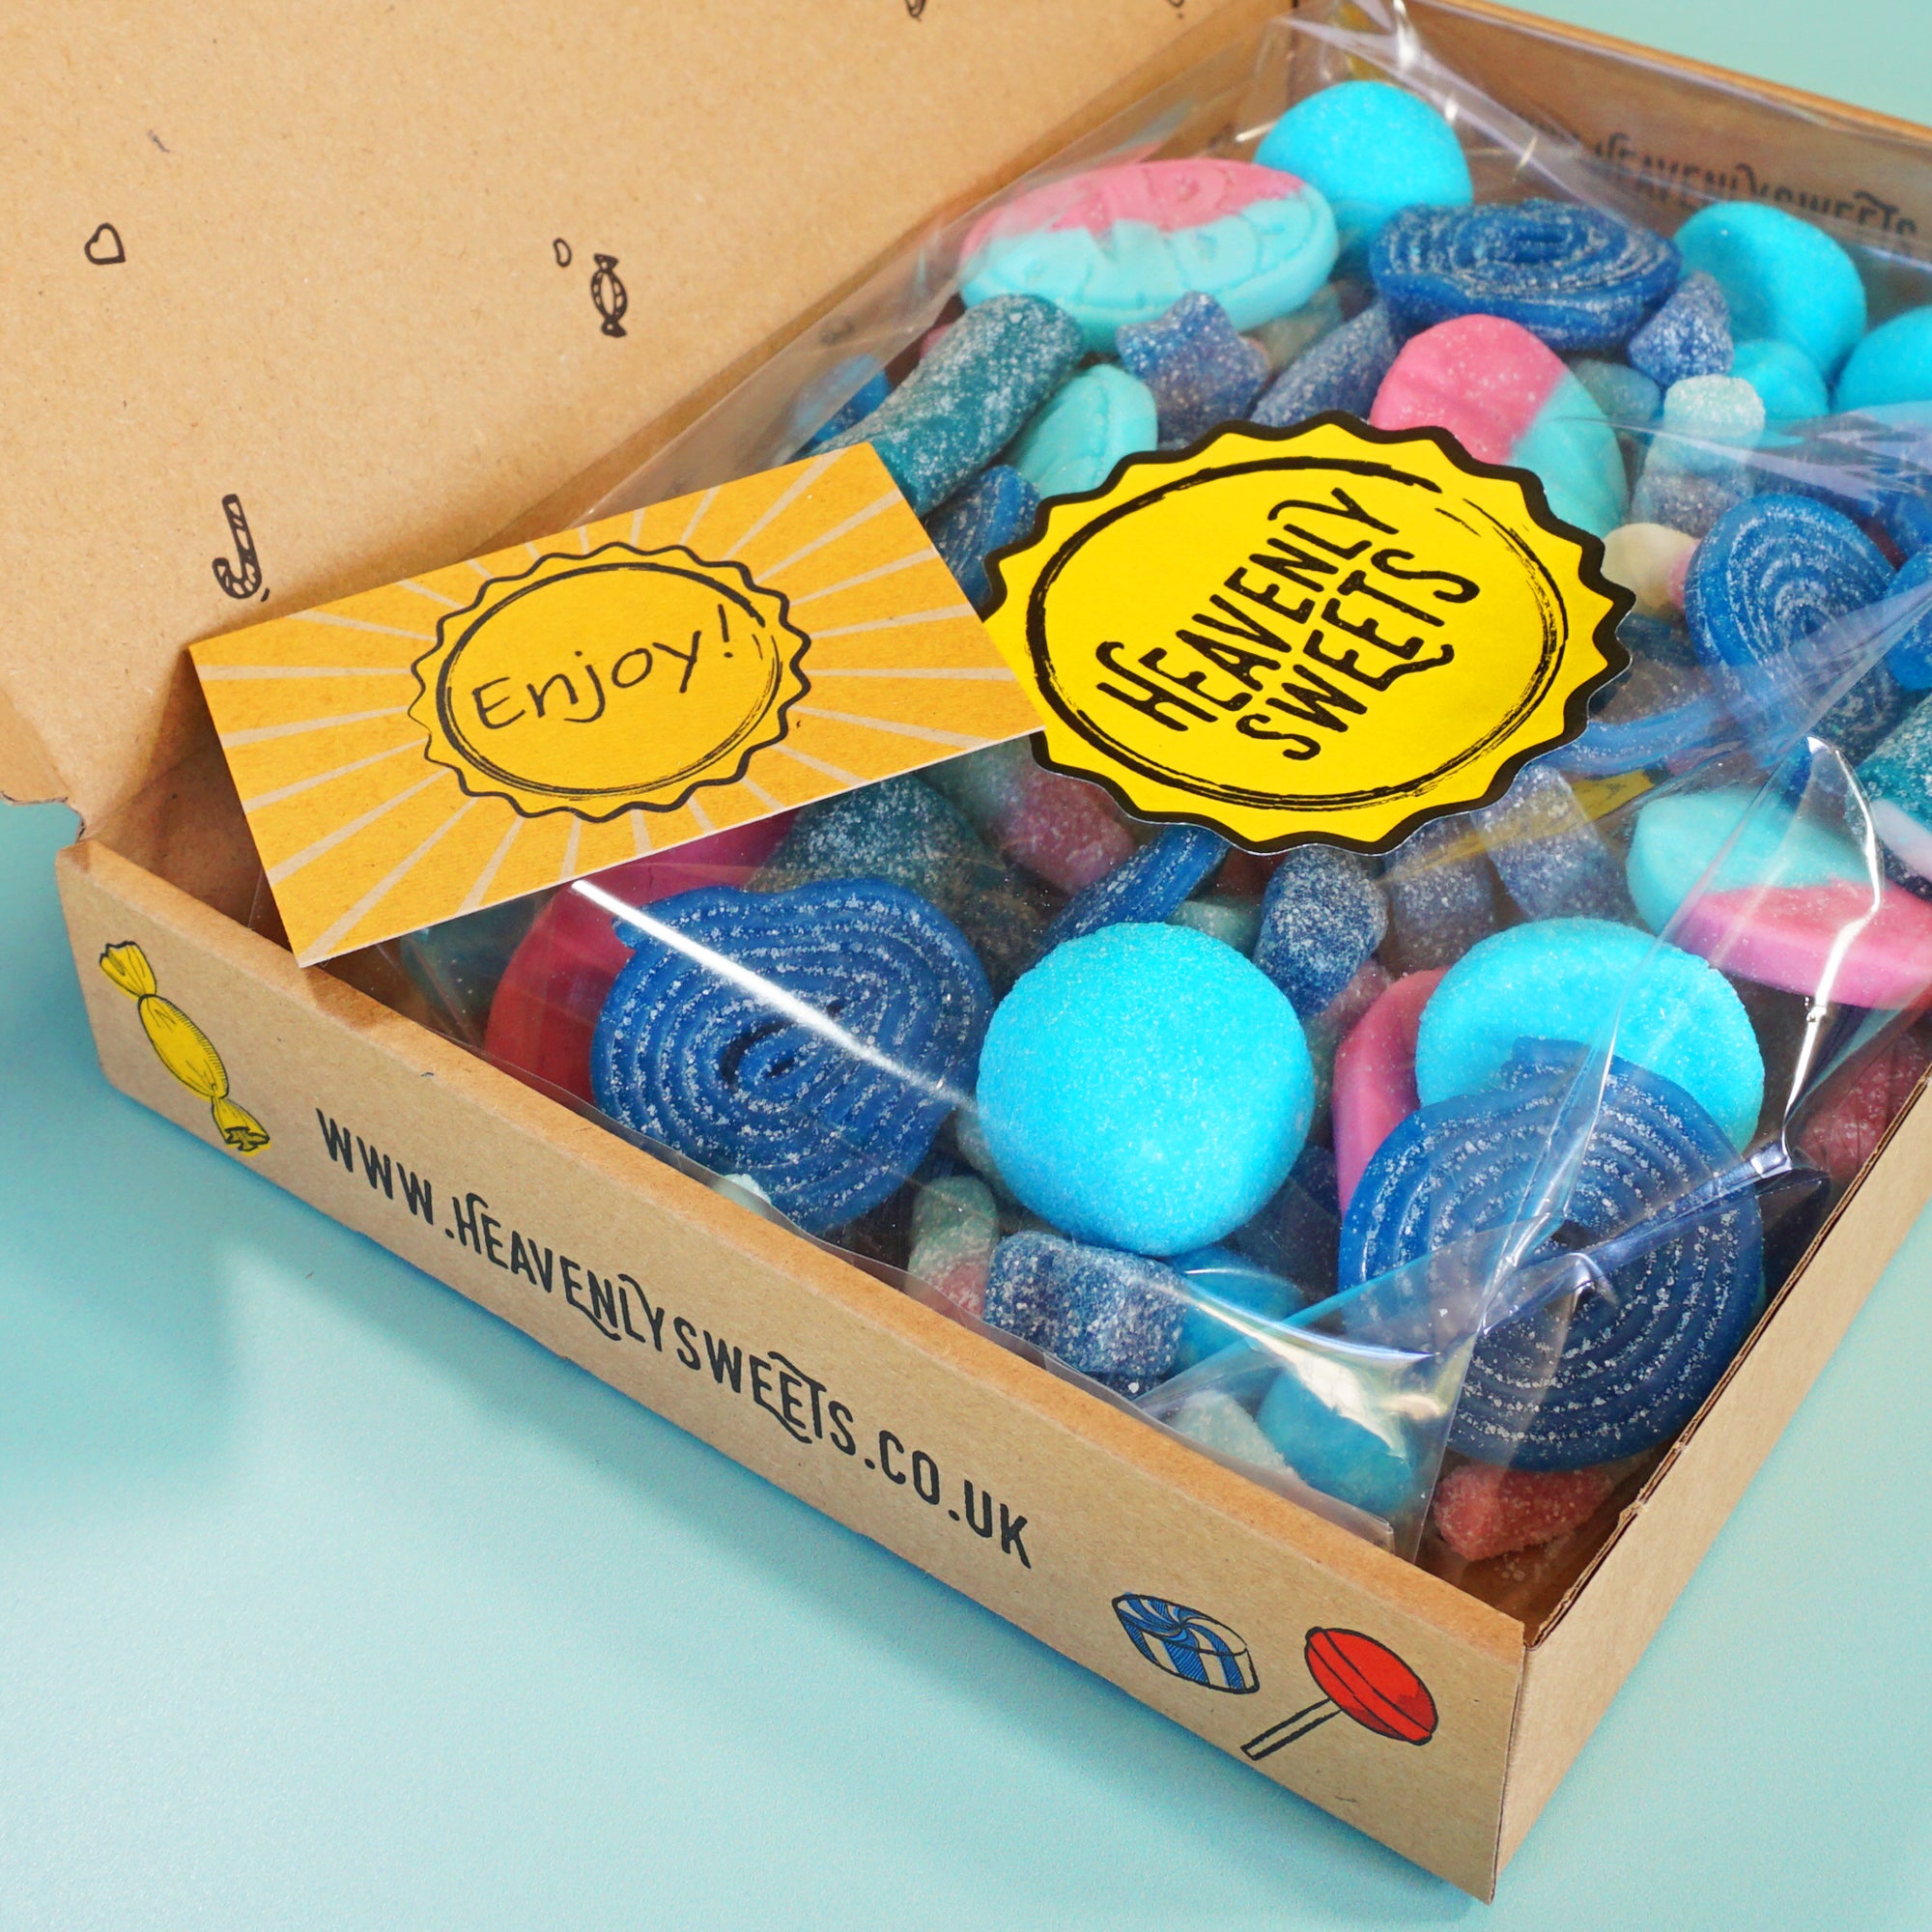 Pick 'n Mix Sweets Gift Box - Large Mixed Blue